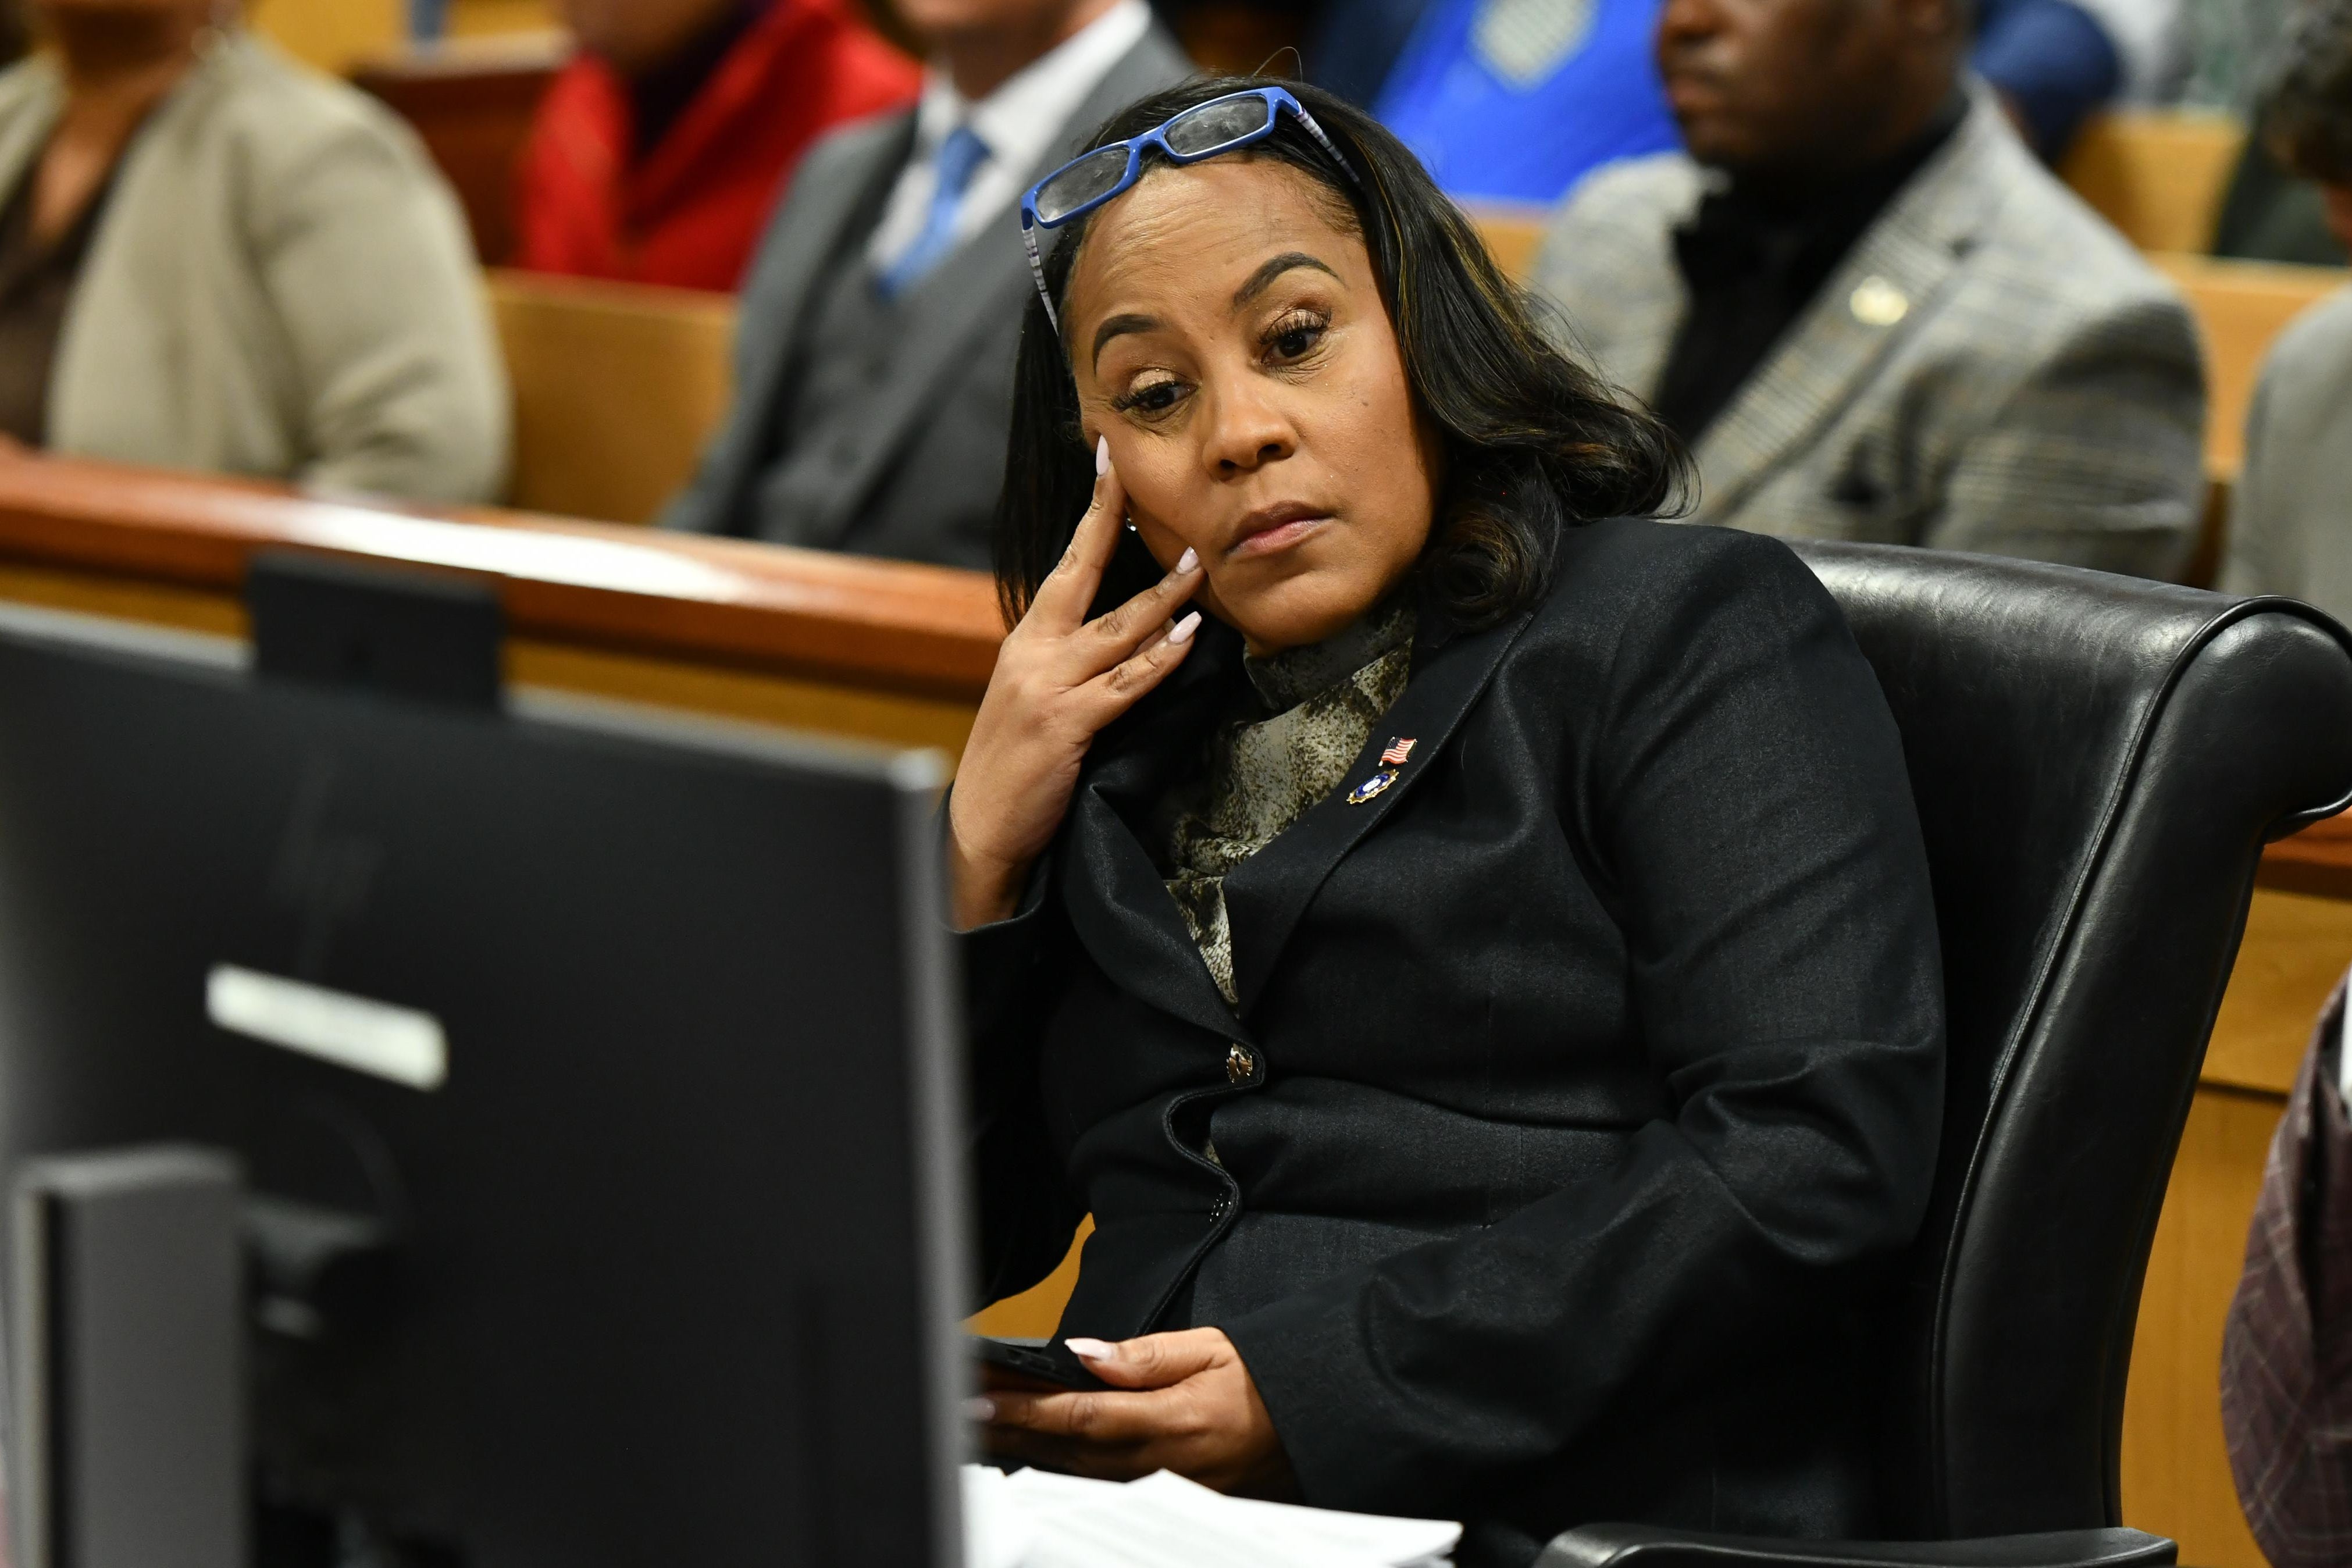 Fulton County District Attorney Fani Willis rests her face against her hand as she sits in court during a hearing in the 2020 election interference case.